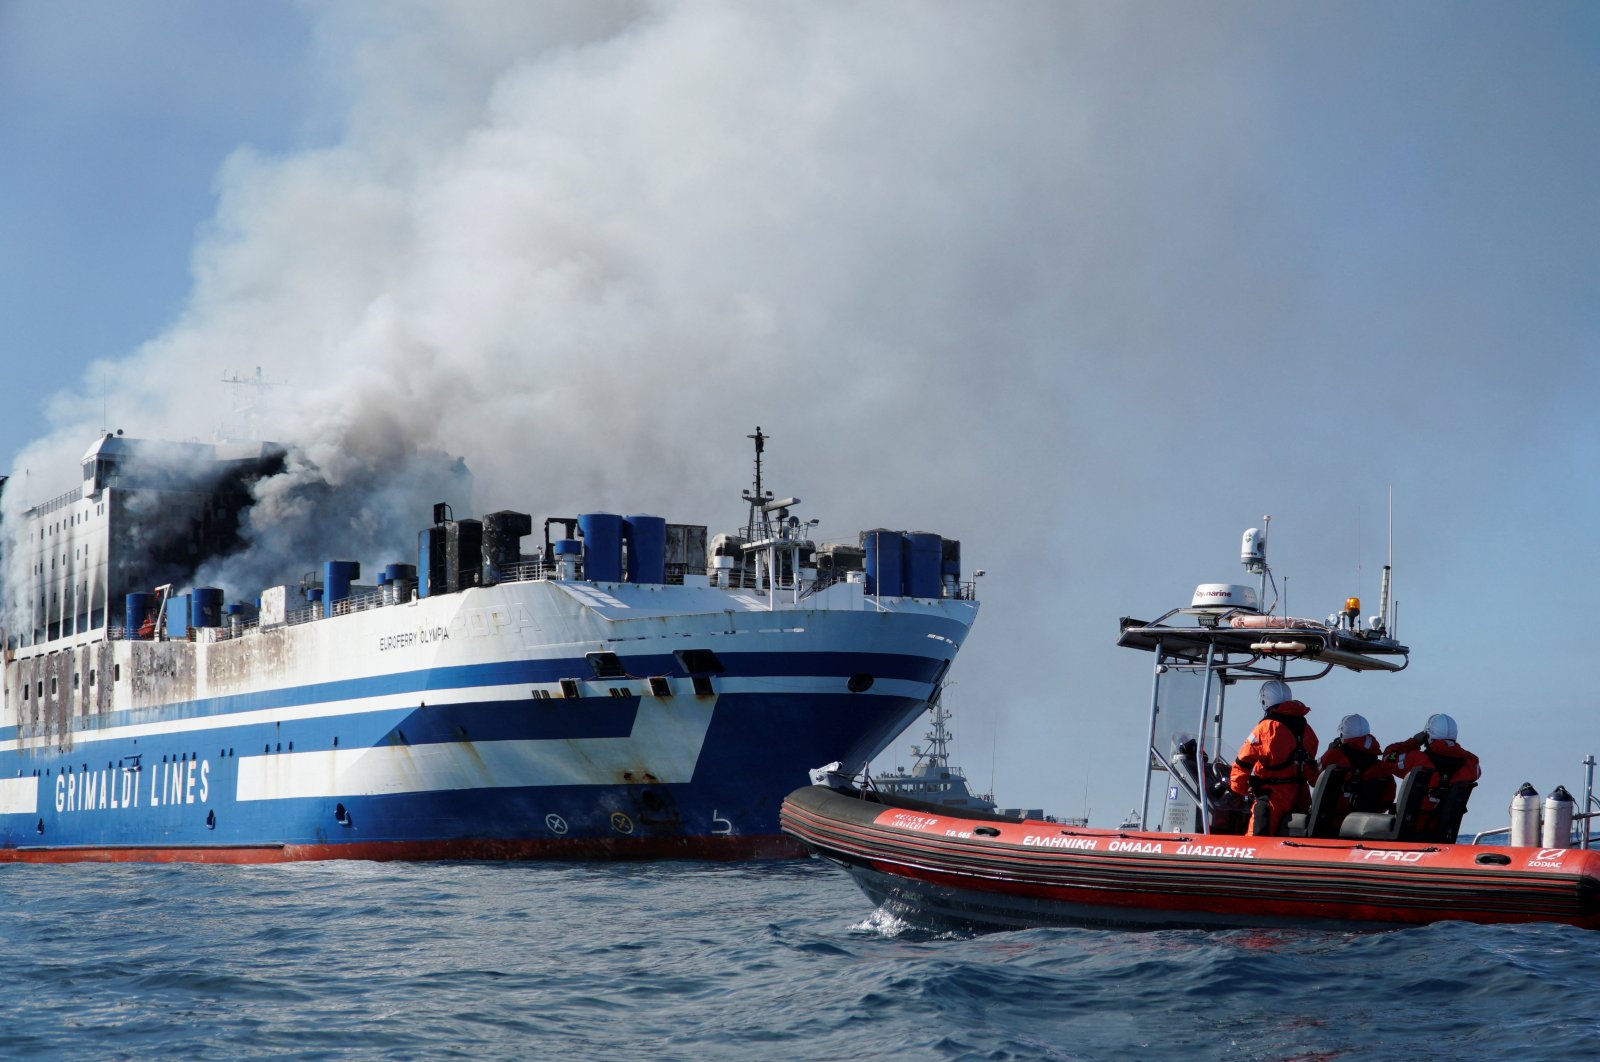 Rescuers watch as smoke rises from the burning Italian-flagged Euroferry Olympia, after a fire broke out on the ferry, off the island of Corfu, Greece, Feb. 18, 2022. (REUTERS Photo)